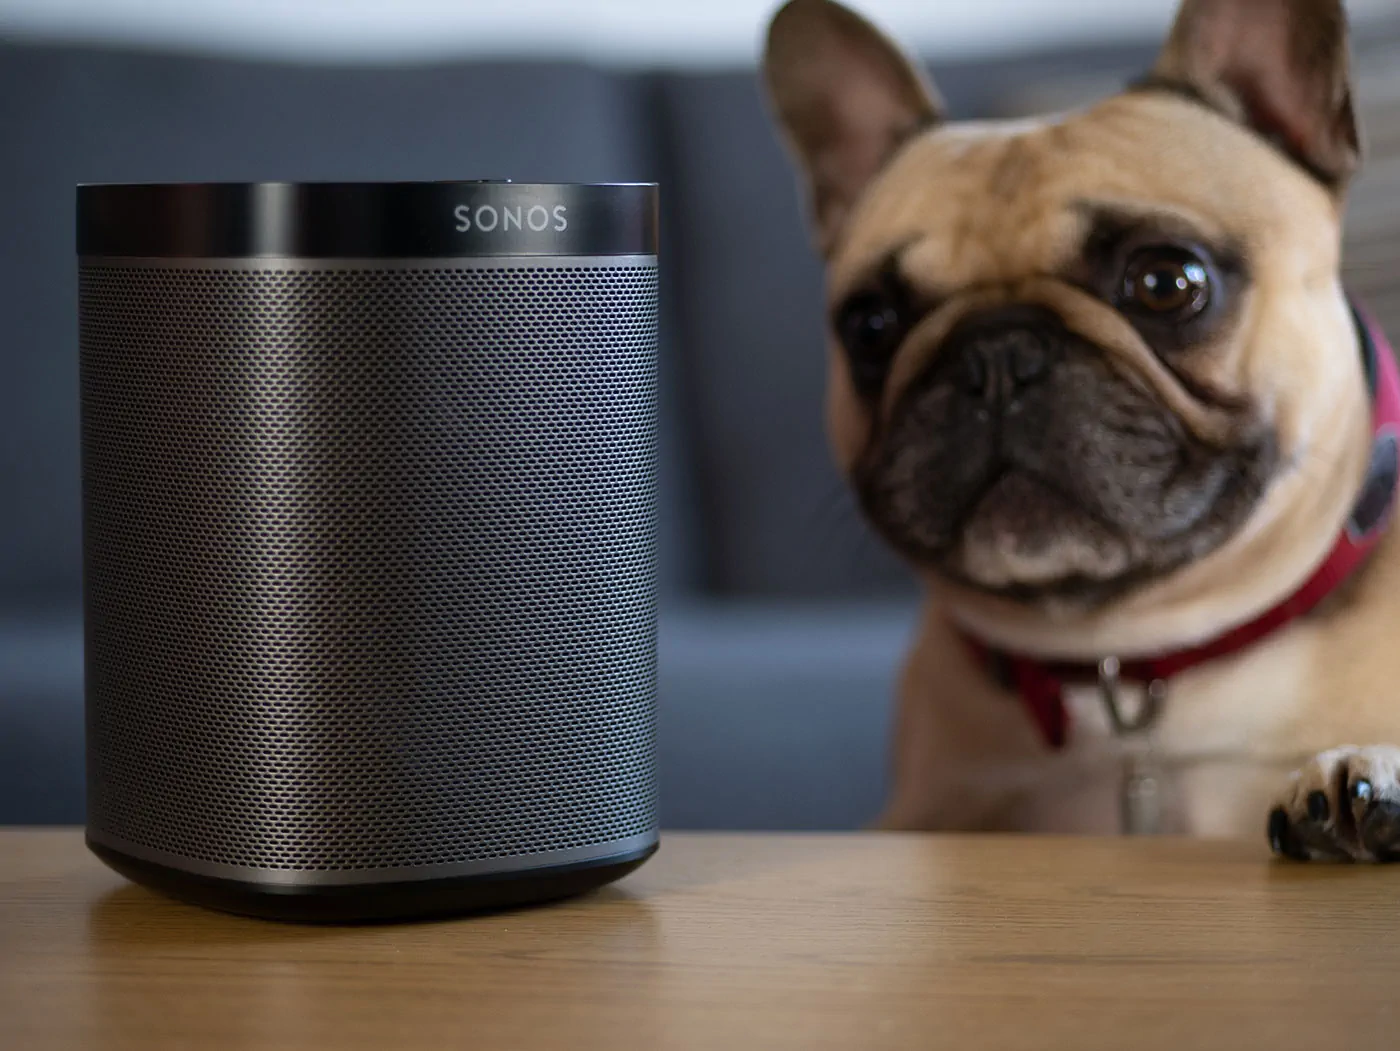 Sonos Speaker with a dog blurred in the background